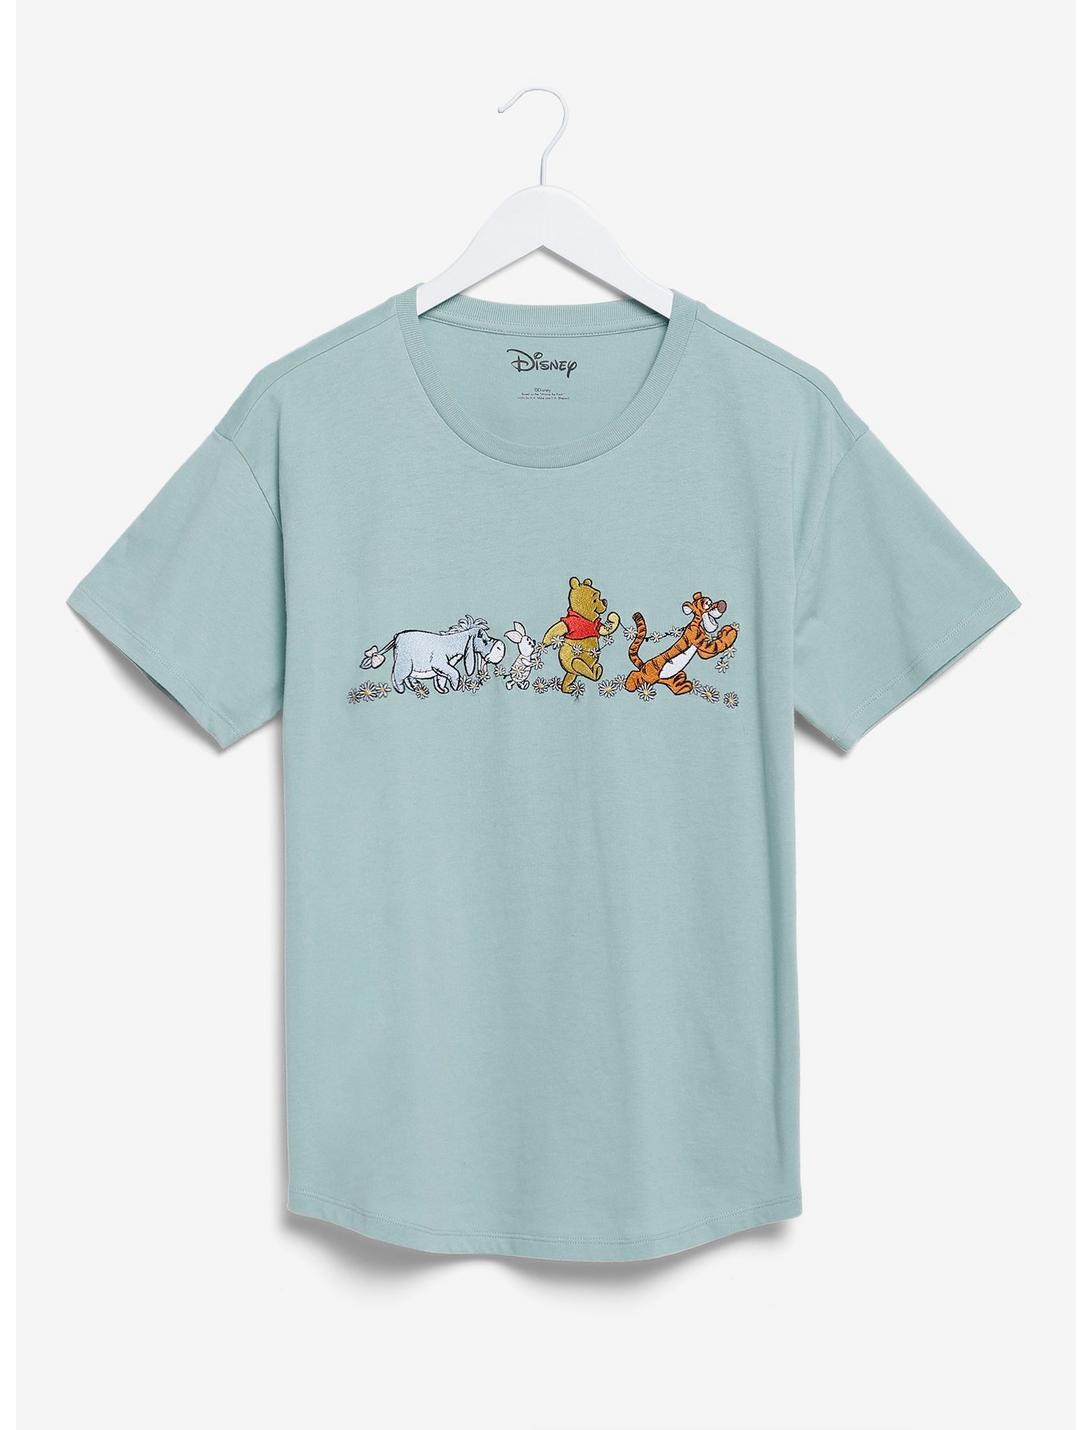 Disney Winnie the Pooh Daisy Chain Women's T-Shirt - BoxLunch Exclusive, SAGE, hi-res